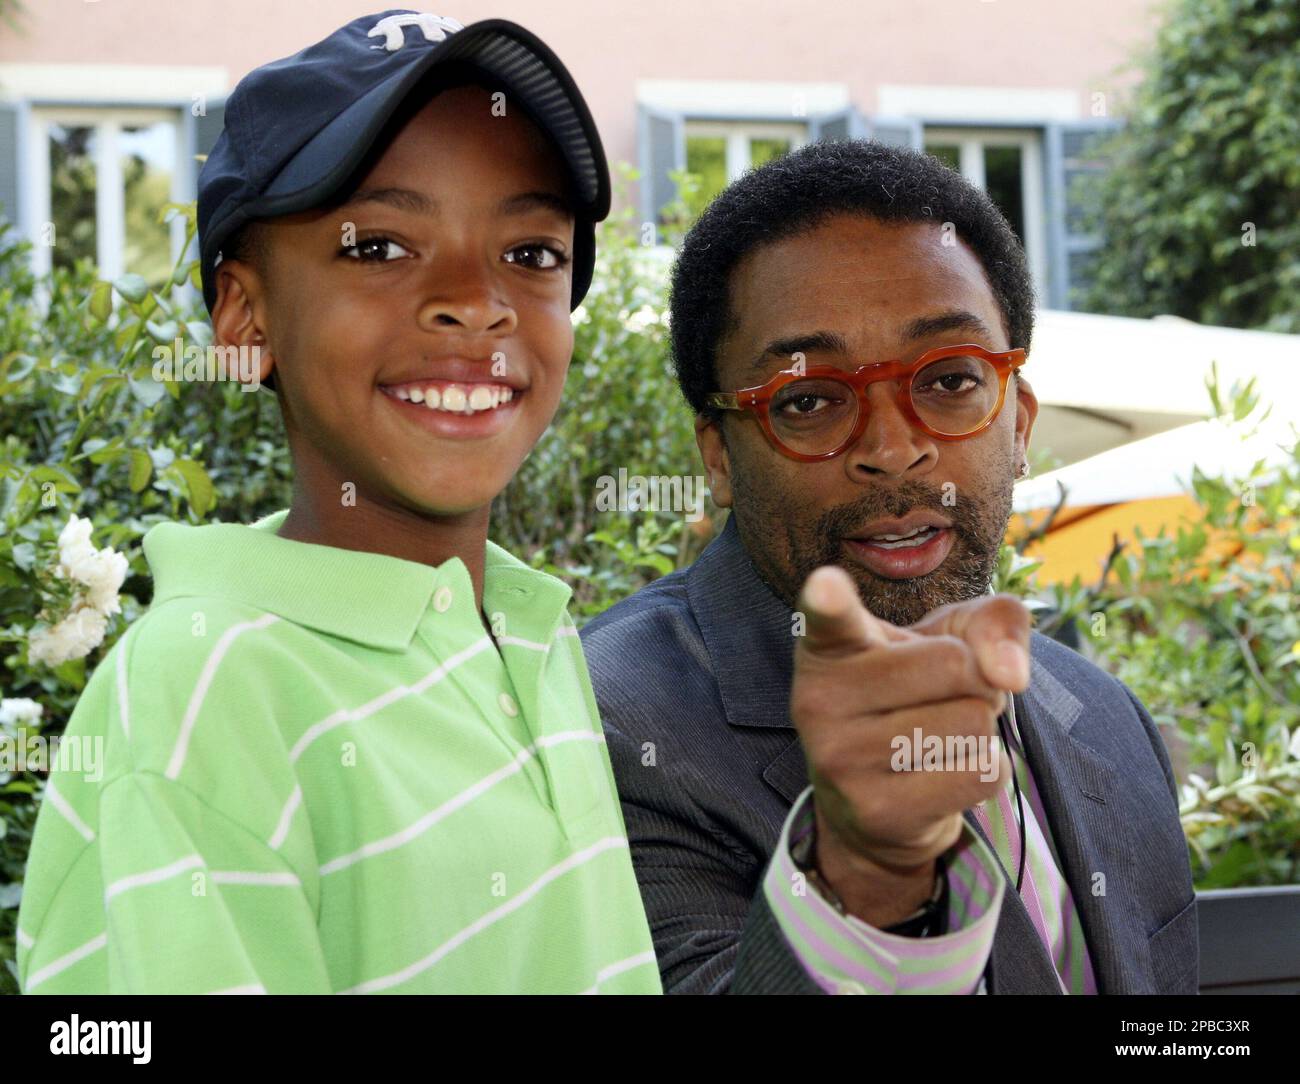 Filmmaker Spike Lee and his son Jack pose for the photographers, in Rome, Tuesday, July 3, 2007. Lee was in Rome to present a movie project on the struggle against Nazi occupiers in Italy that he hopes will highlight the contributions of black soldiers fighting in the U.S. army during the World War II. (AP Photo/Sandro Pace) Stock Photo